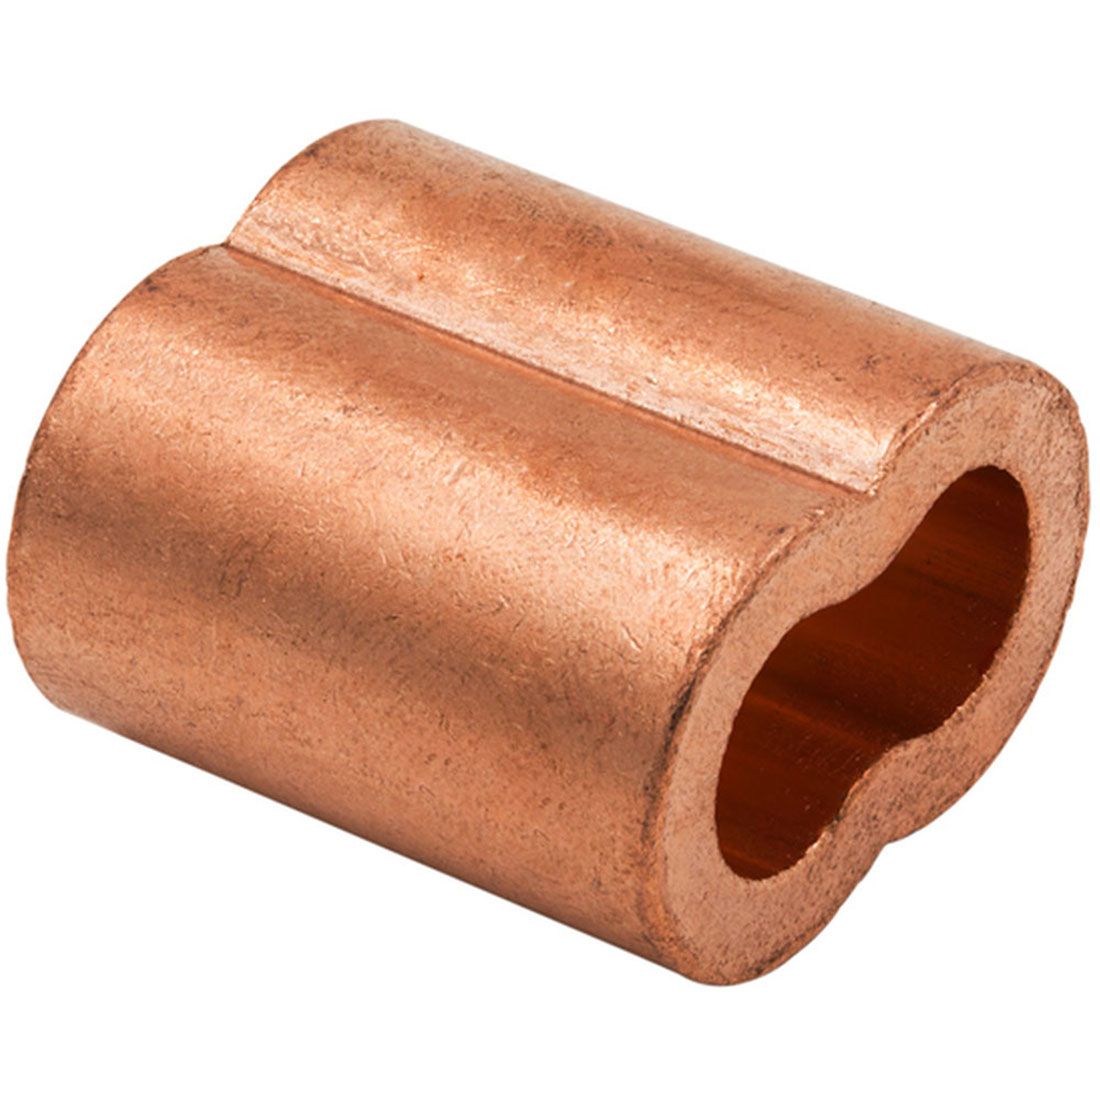 3/32 in Wire Rope Sleeve PK25 Copper